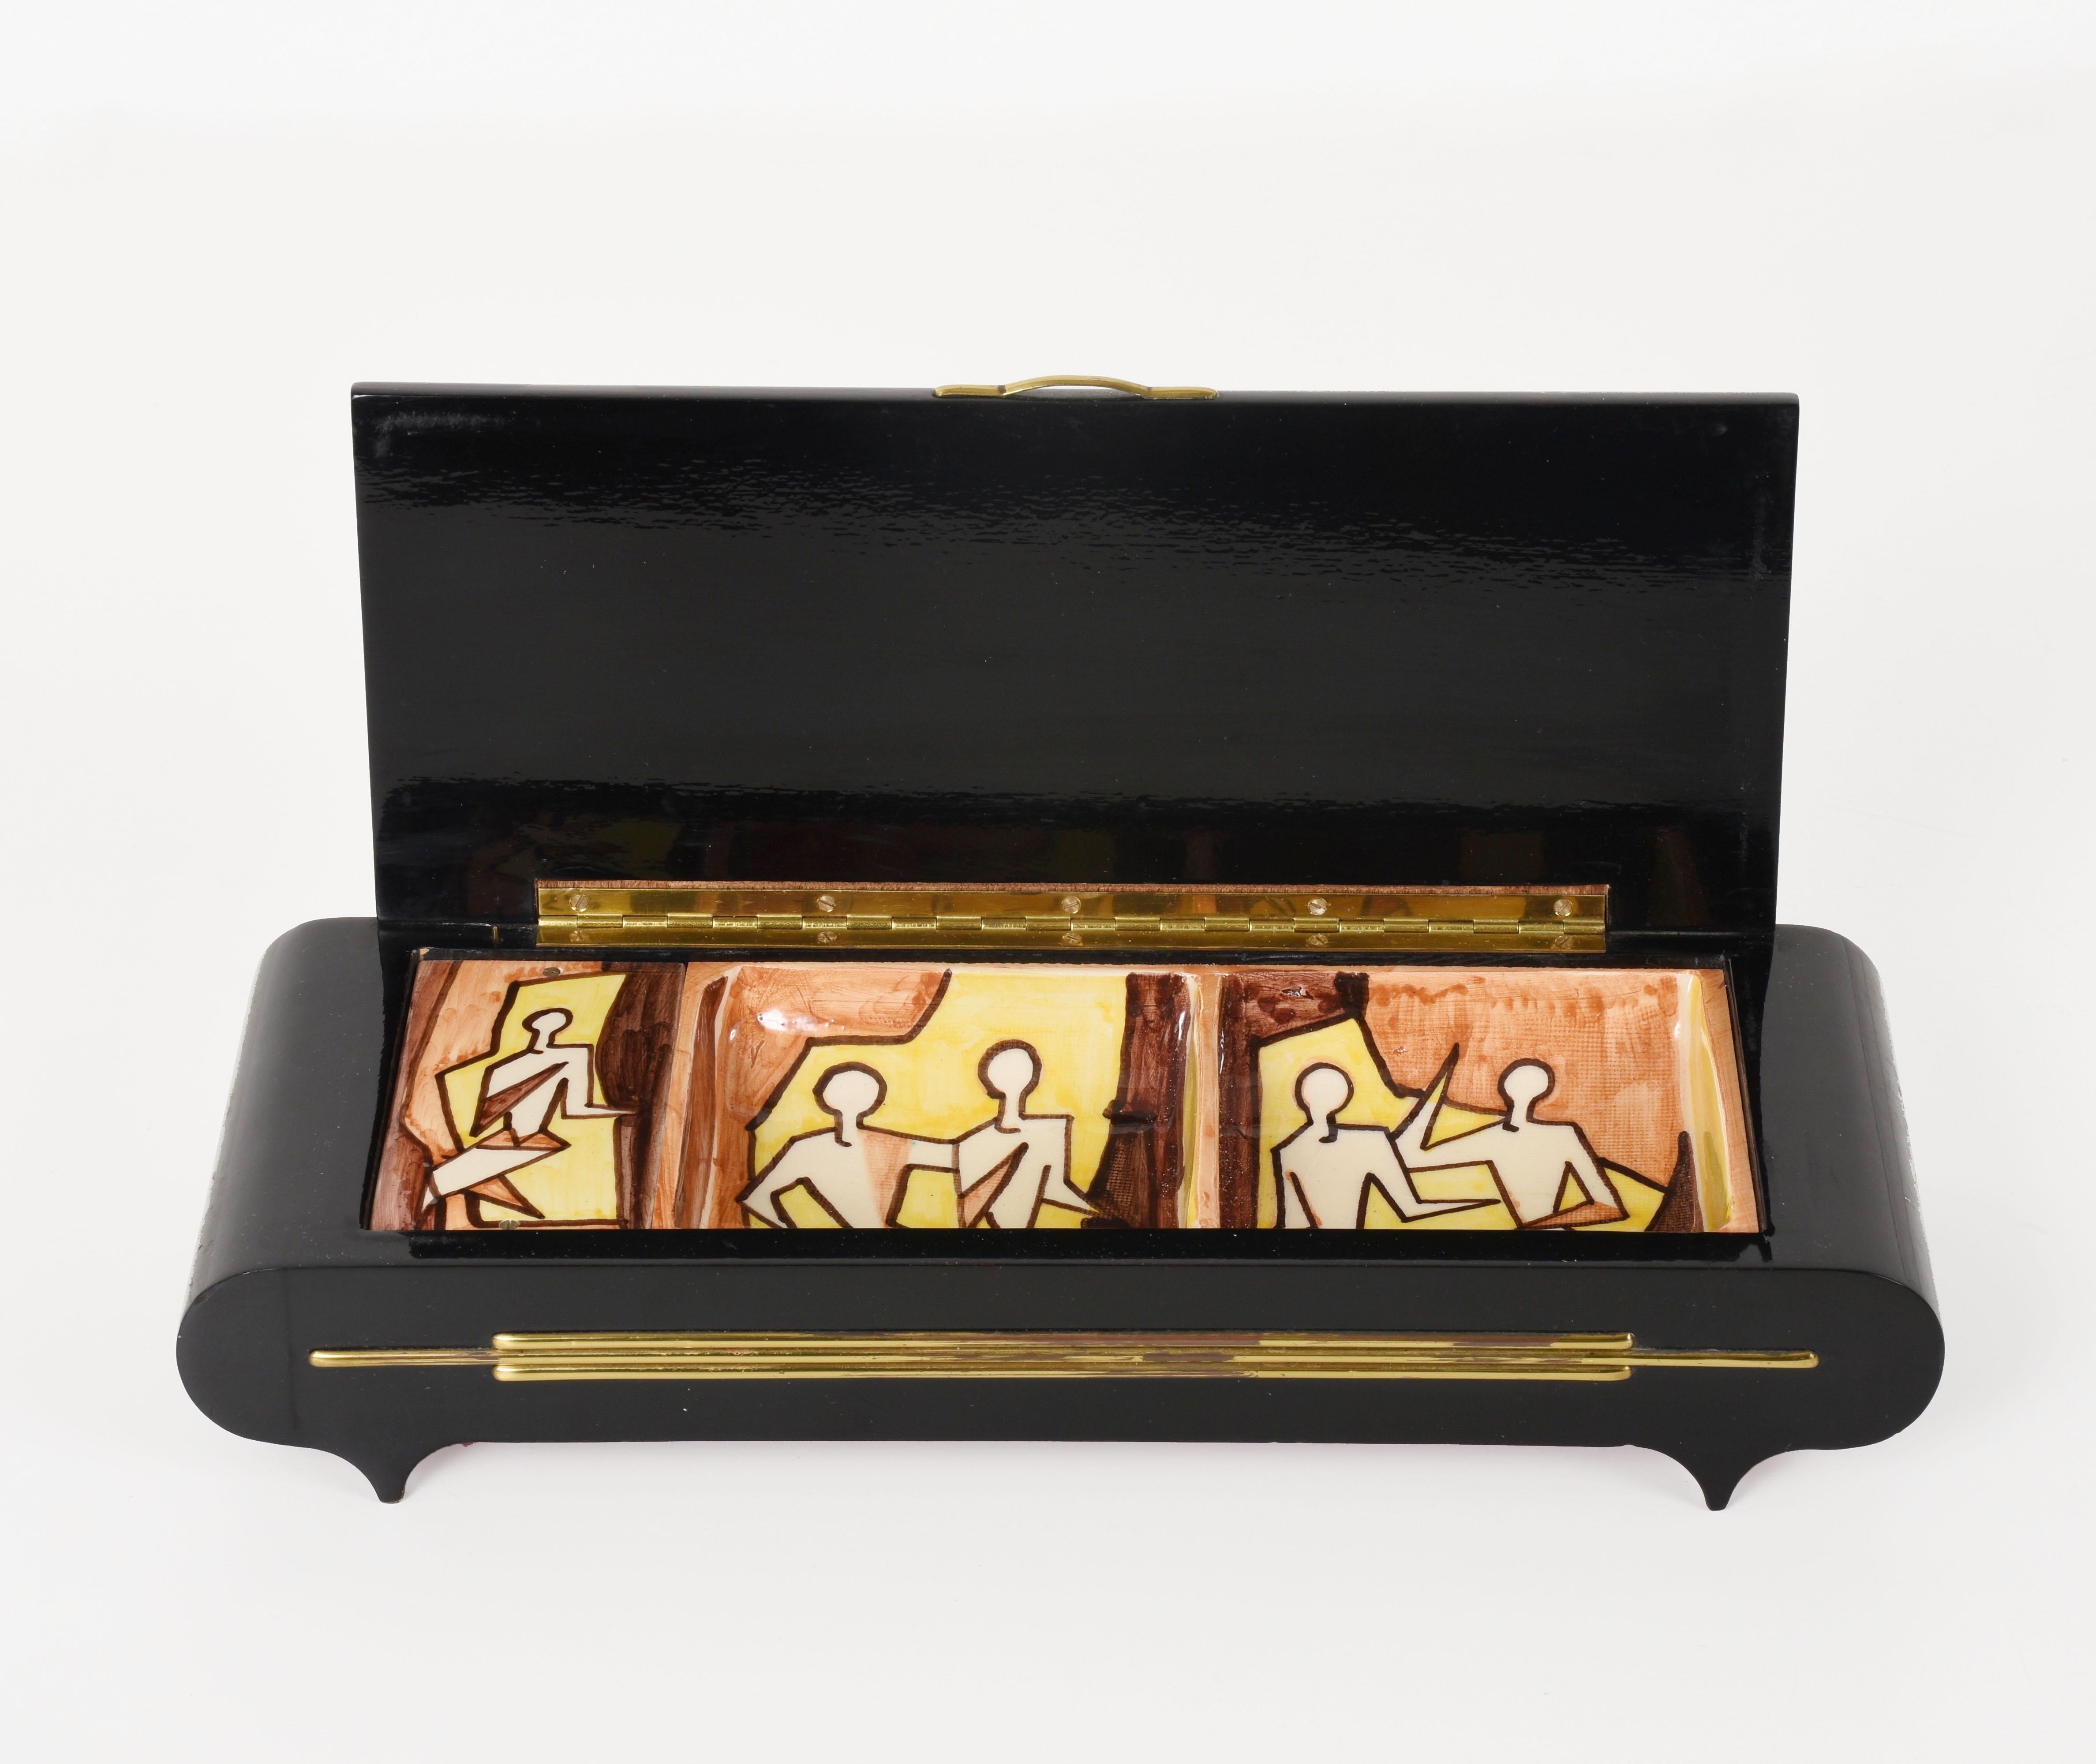 Pier Giovanni Urbino Sardella, vintage ceramic decorated jewelry box
Italian, 1960s for Ceramica, black lacquered wood case with inset hand painted porcelain plaques featuring fox hunters, signed on lid, with working musical mechanism.